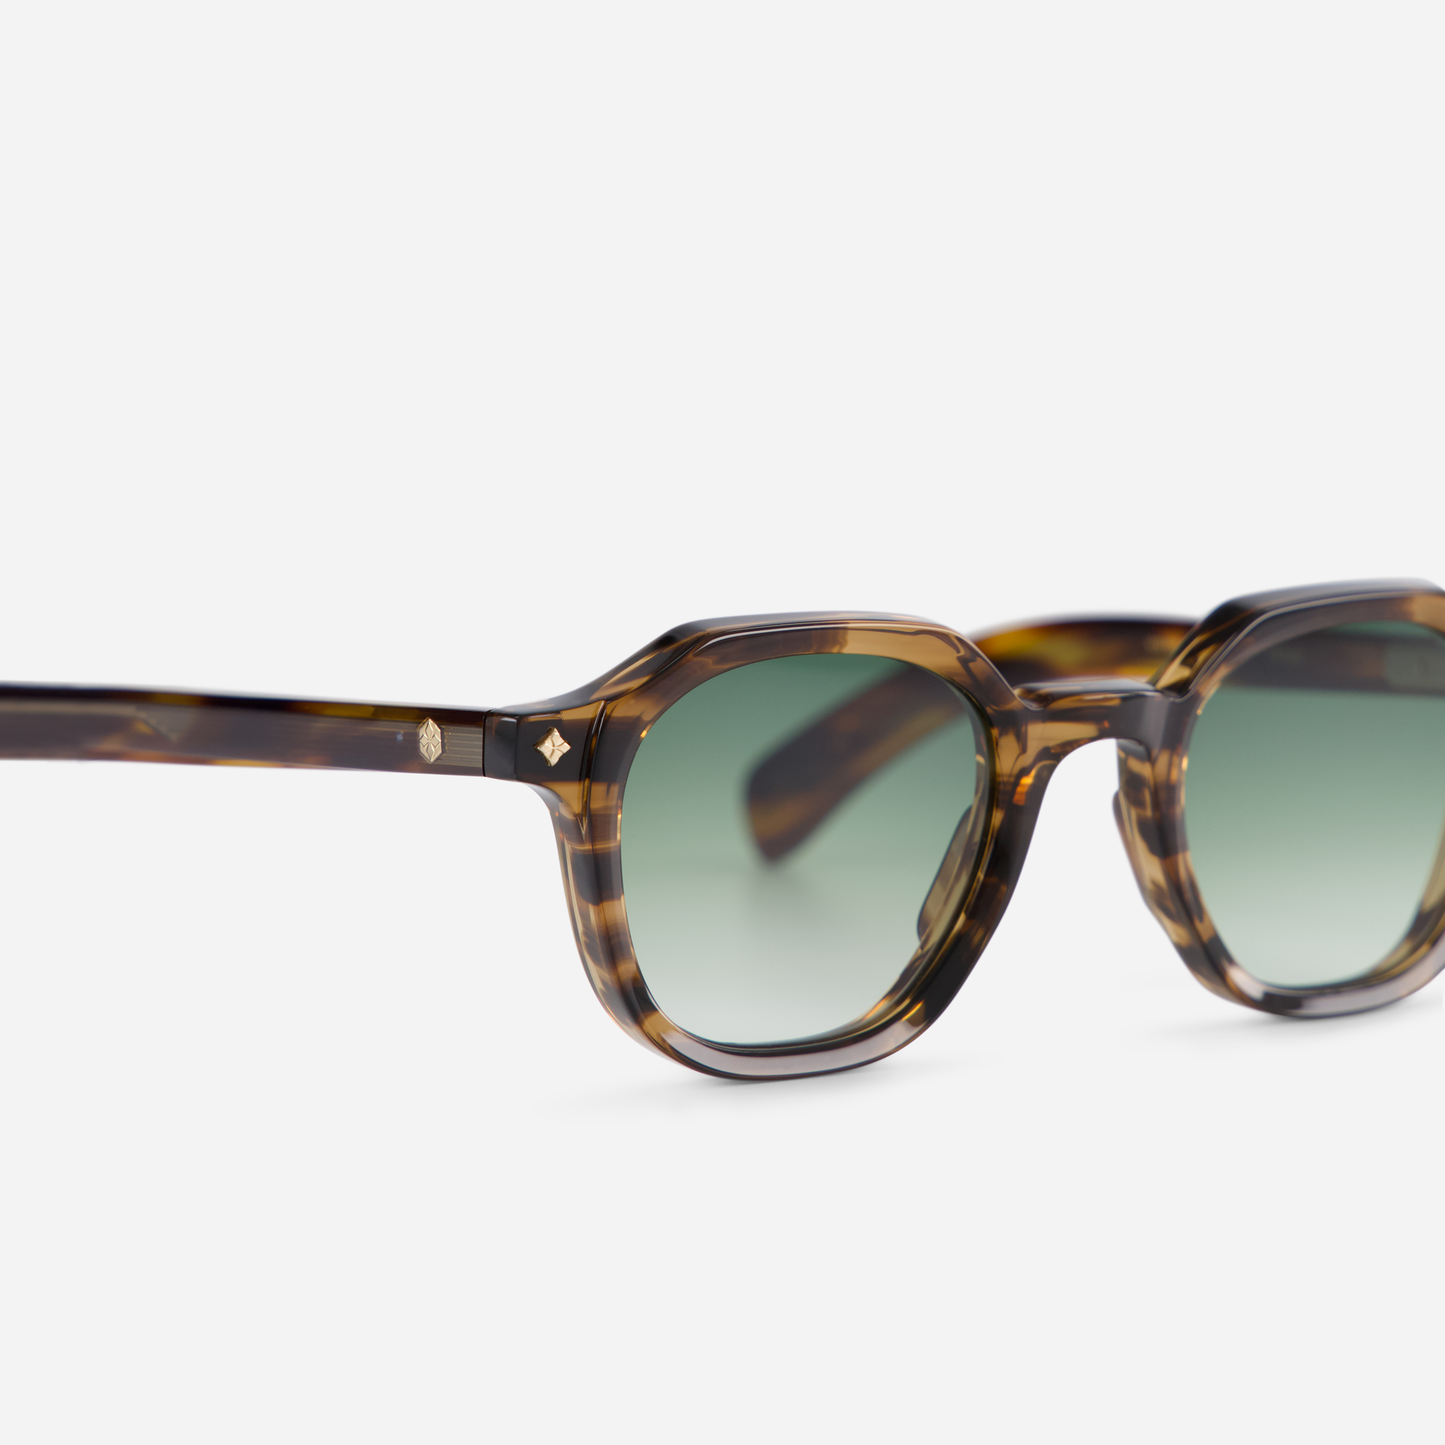 Explore the stylish combination of a Japanese acetate frame in Coyote tortoise color with gradient green lenses in the Perse CT-1.